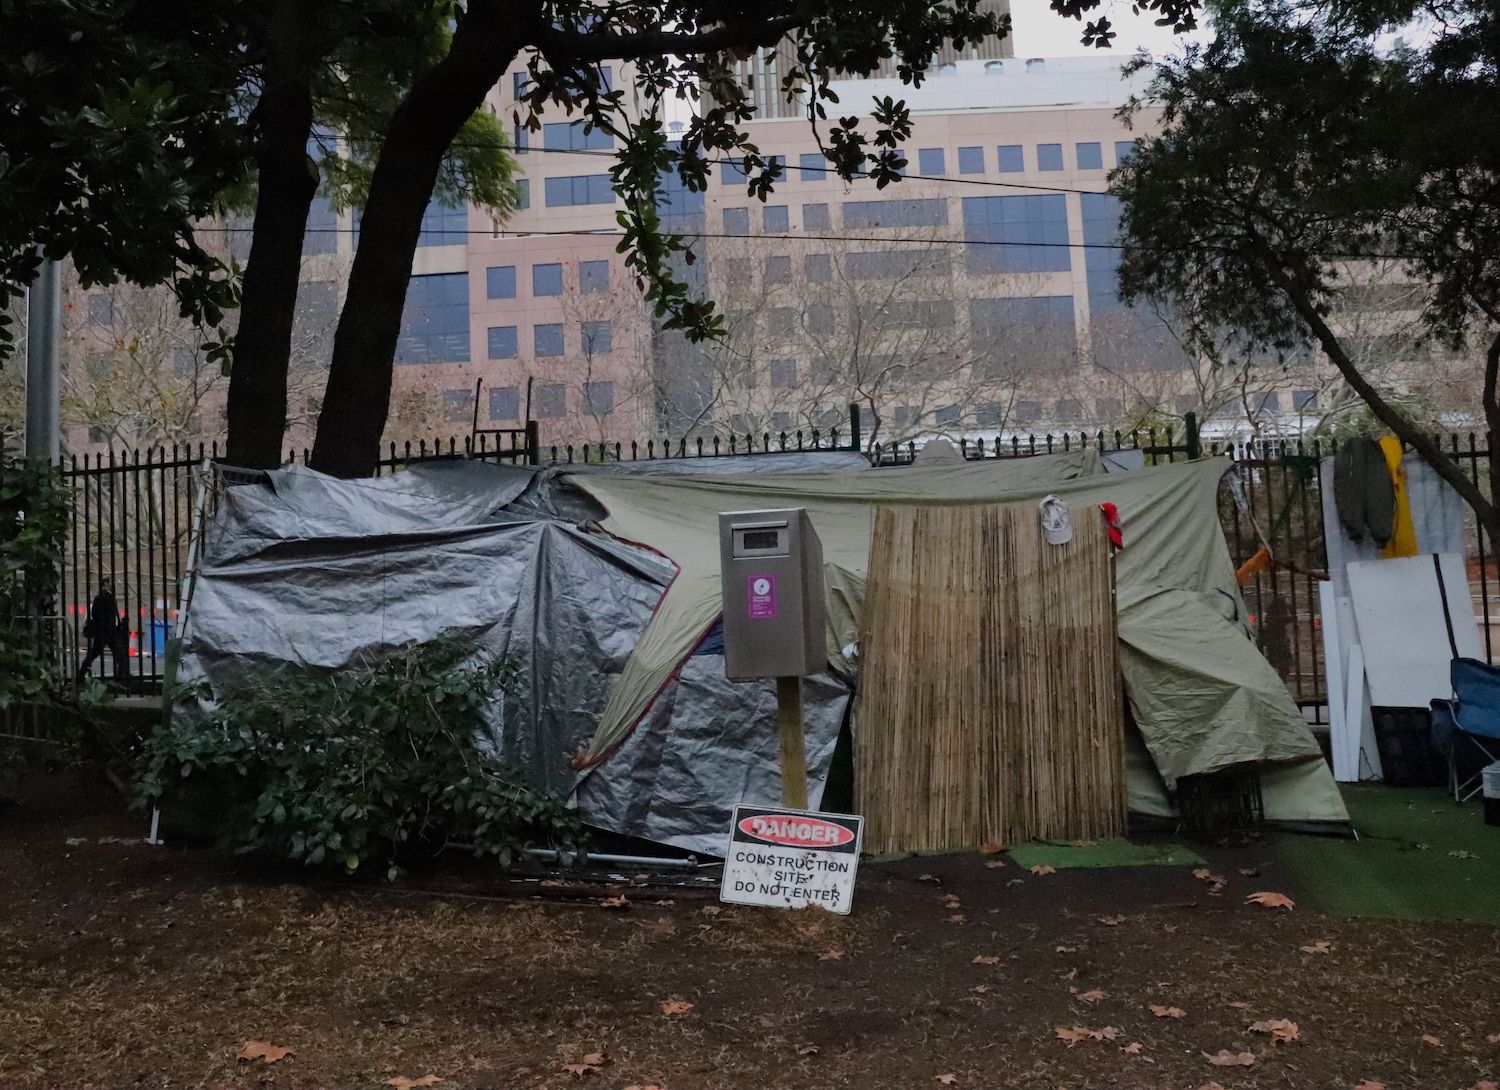 Pictured: Tents at Belmore Park, Sydney.